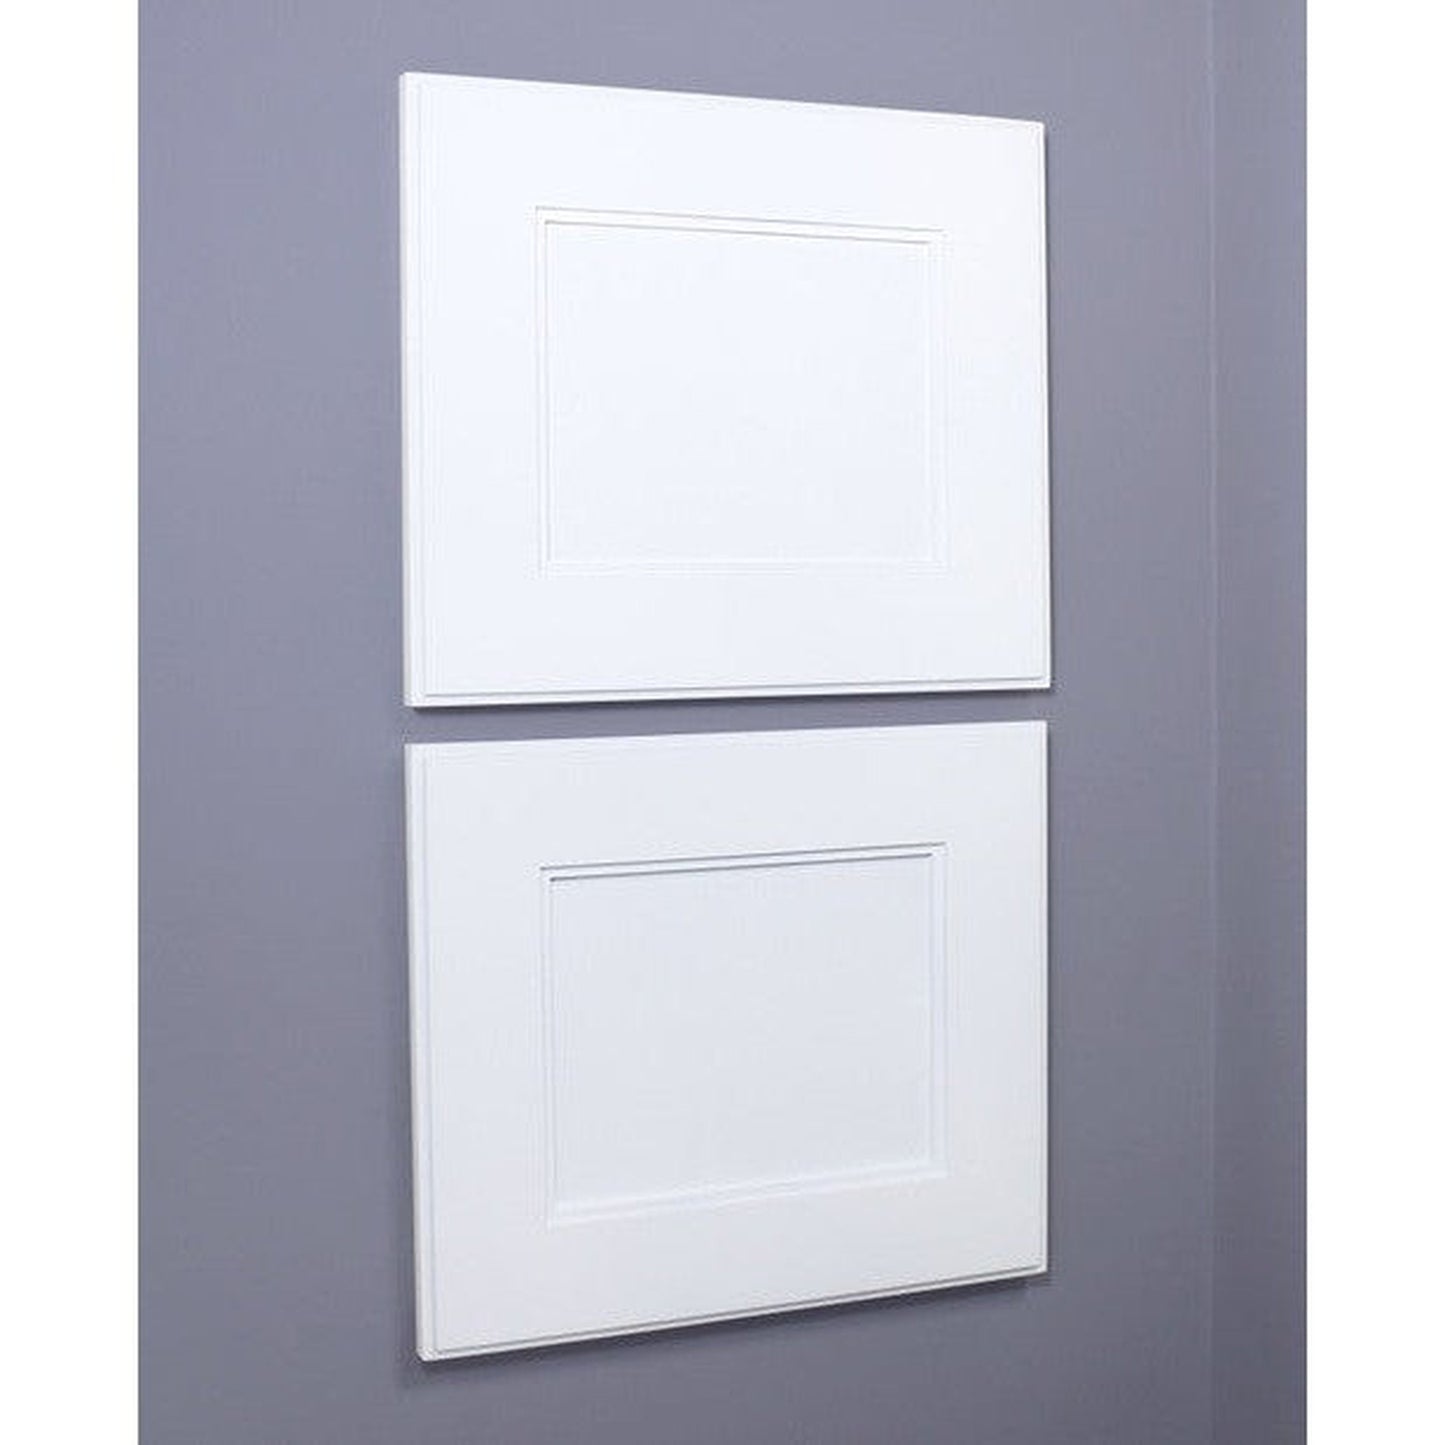 Fox Hollow Furnishings 11" x 14" White Compact Landscape Shaker Style Standard 4" Depth Recessed Medicine Cabinet With Mirror